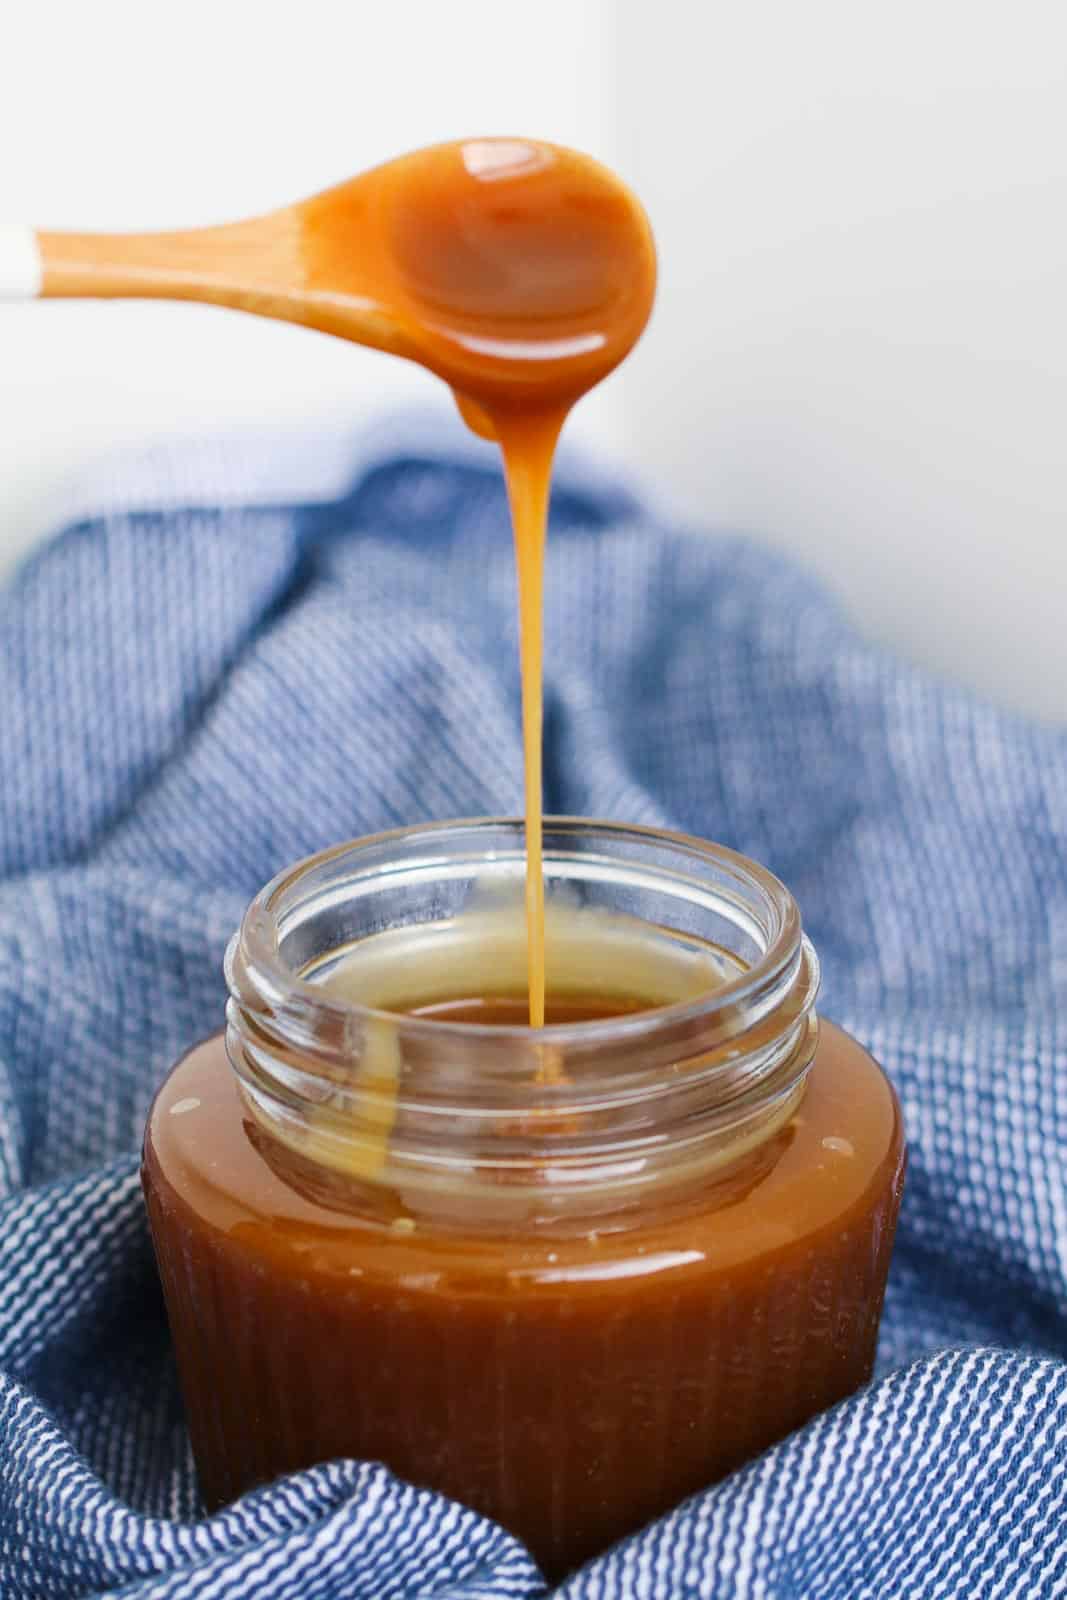 Caramel sauce dripping off a small spoon into a jar of sauce.